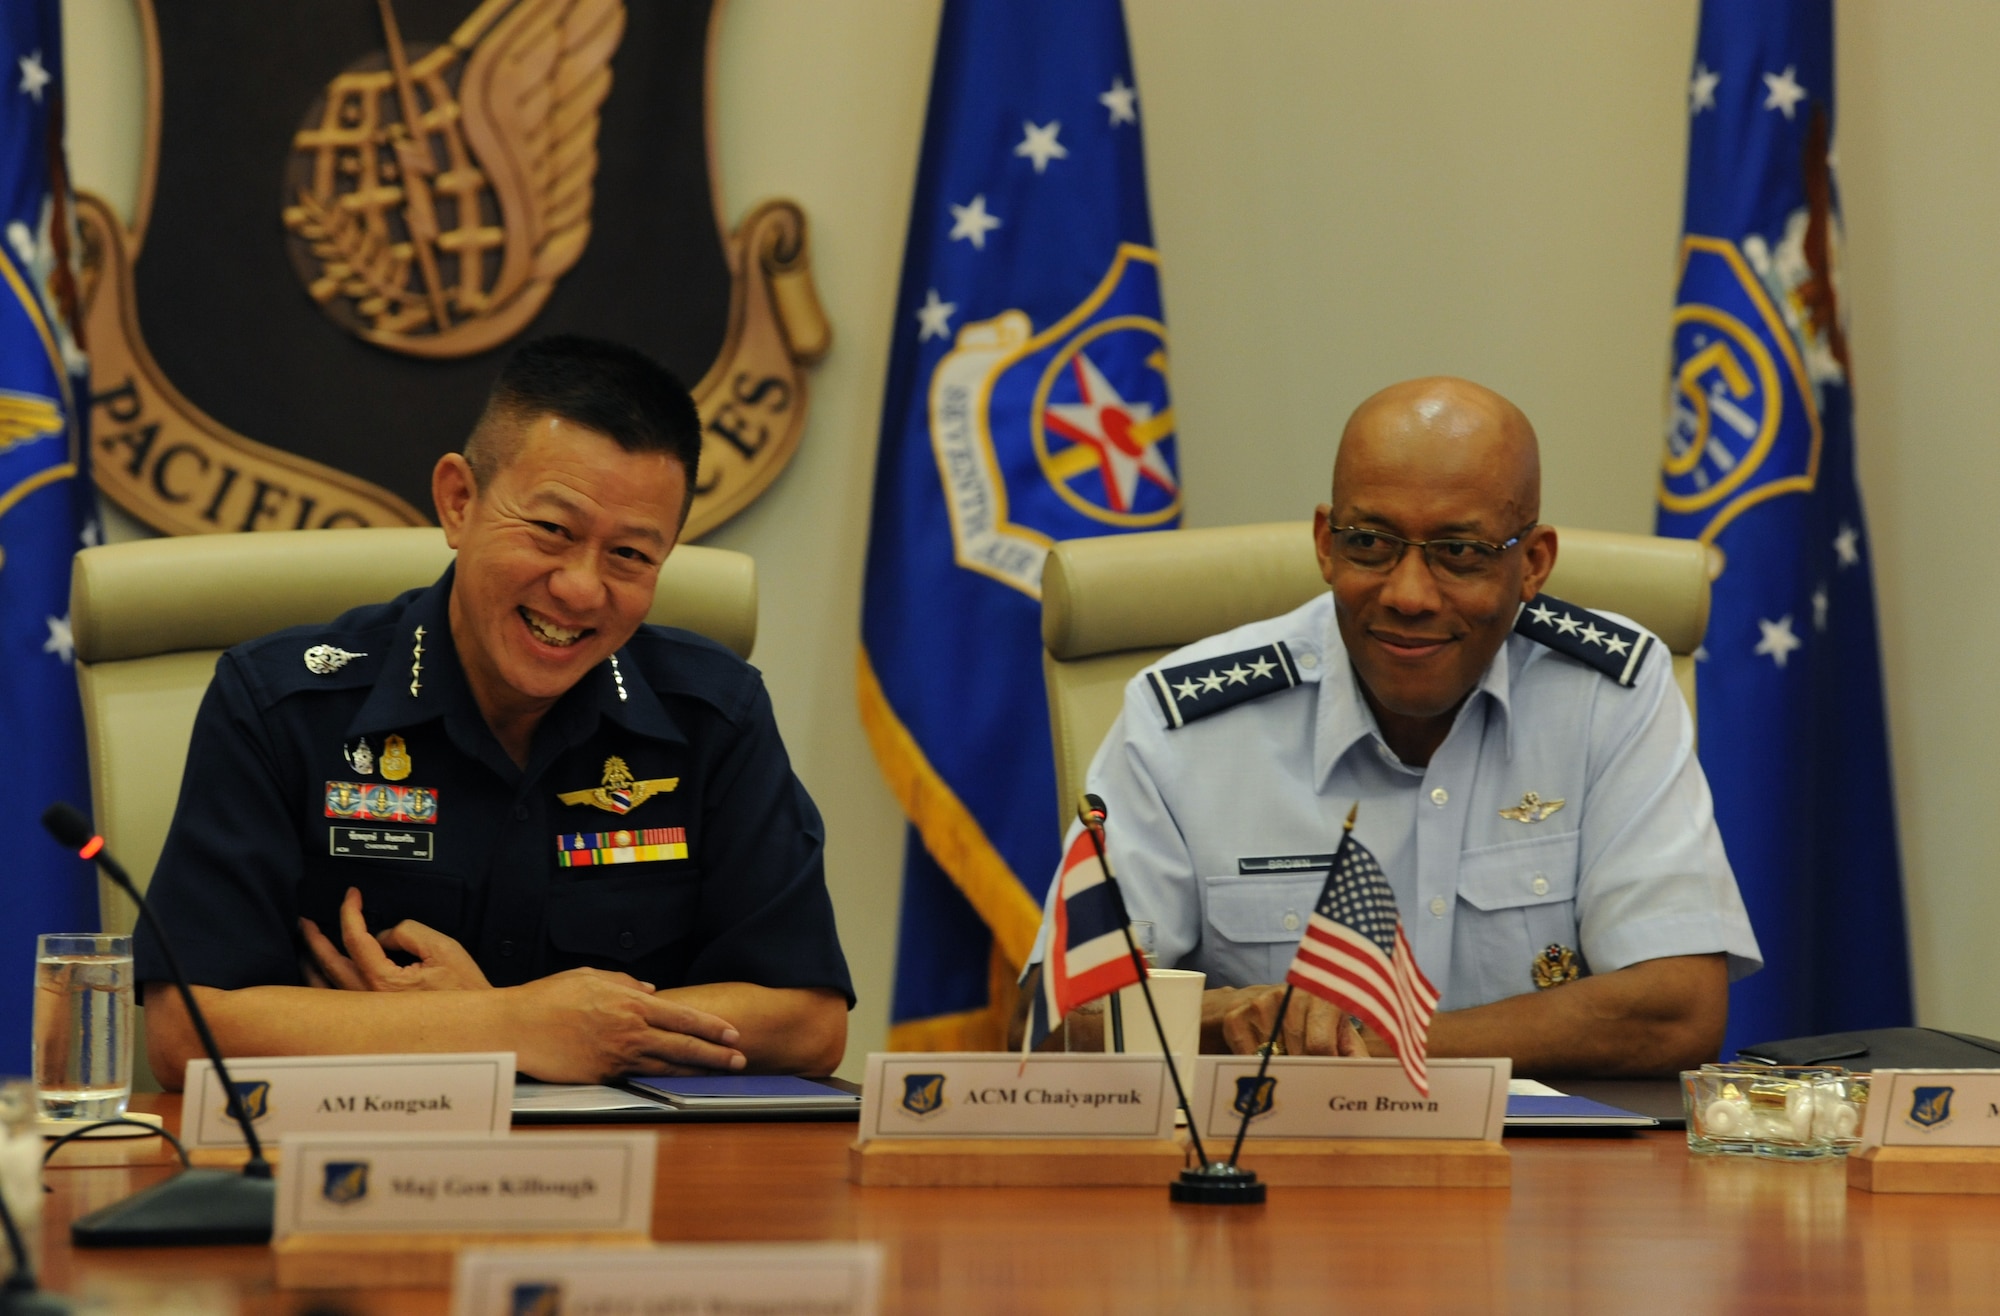 Commander-in-Chief of the Royal Thai air force (RTAF) Chief Air Marshal Chaiyapruk Didyasarin, and U.S. Air Force Commander of Pacific Air Forces (PACAF), Gen. CQ Brown, Jr., listen as USAF and RTAF members introduce themselves before a briefing at Headquarters PACAF, Joint Base Pearl Harbor-Hickam, Hawaii, Oct. 29, 2018.